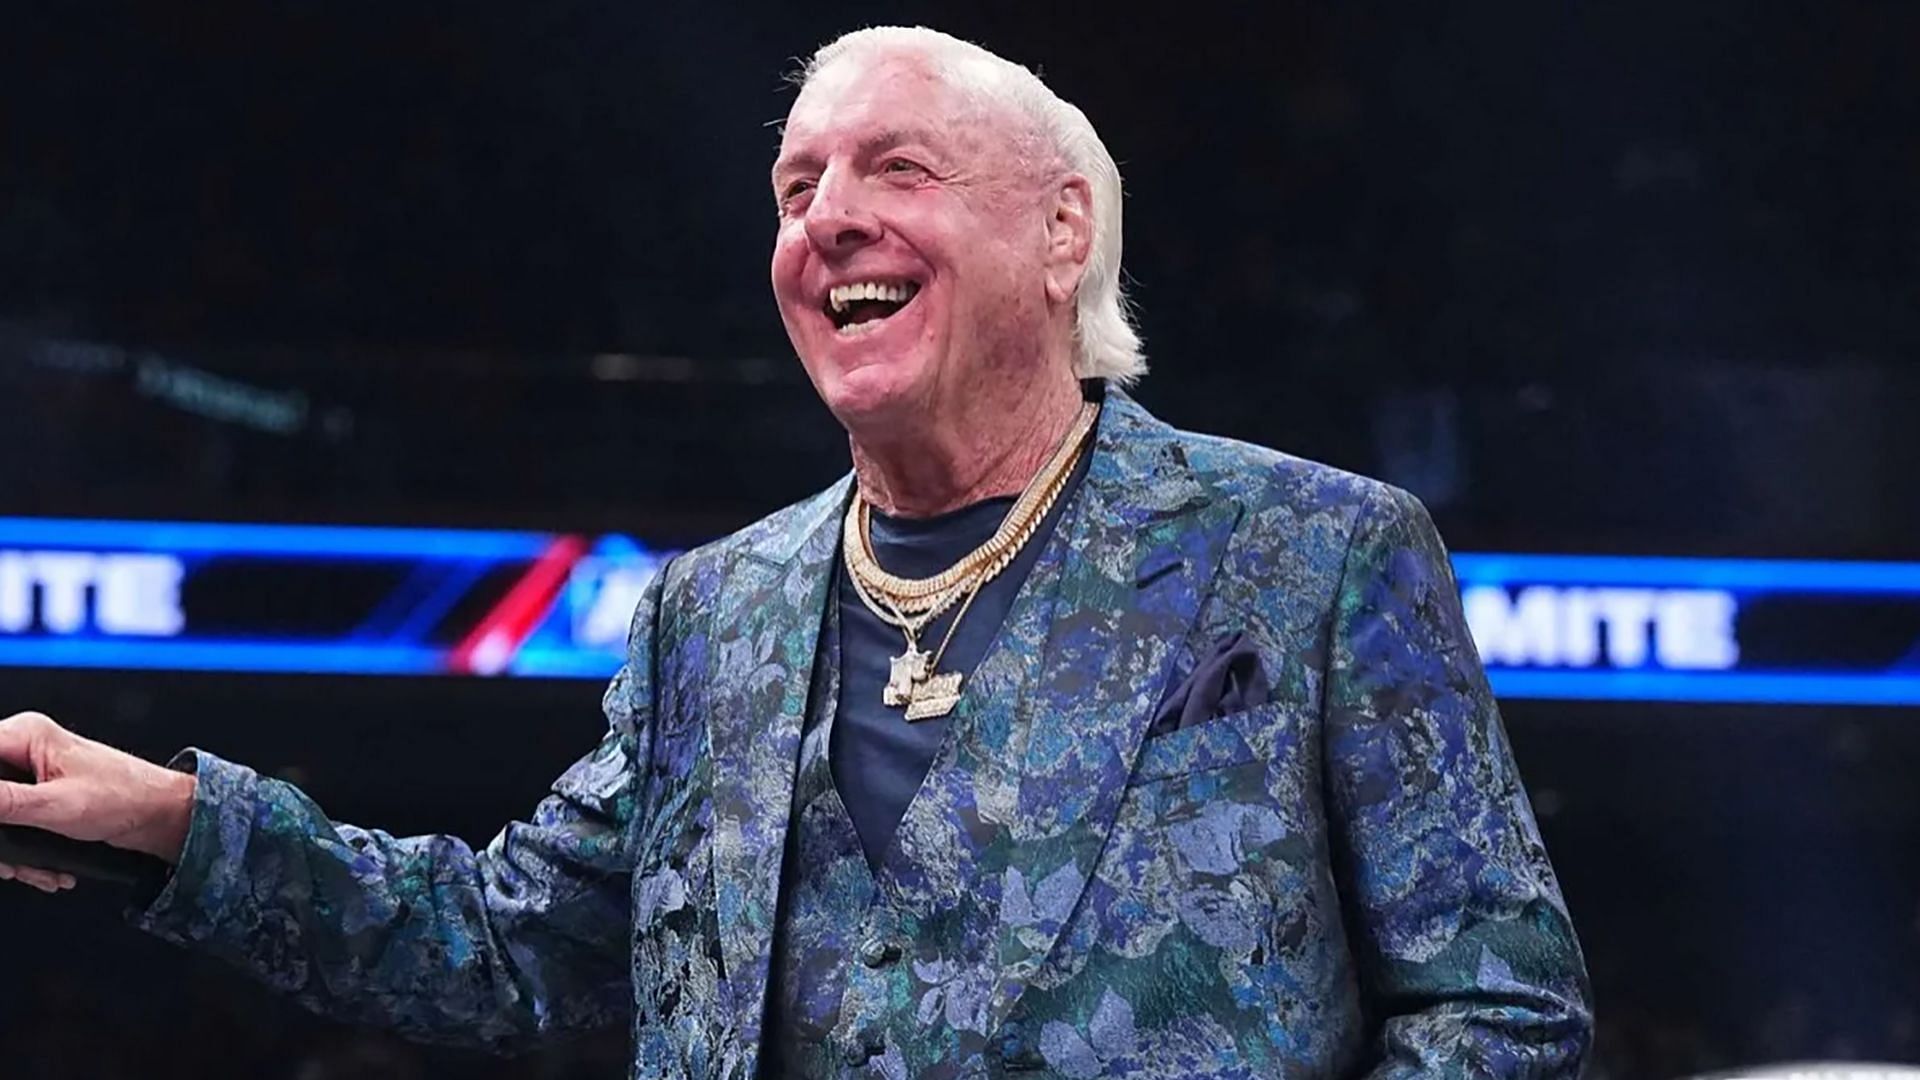 WWE Hall of Famer Ric Flair stands in the ring on AEW Dynamite